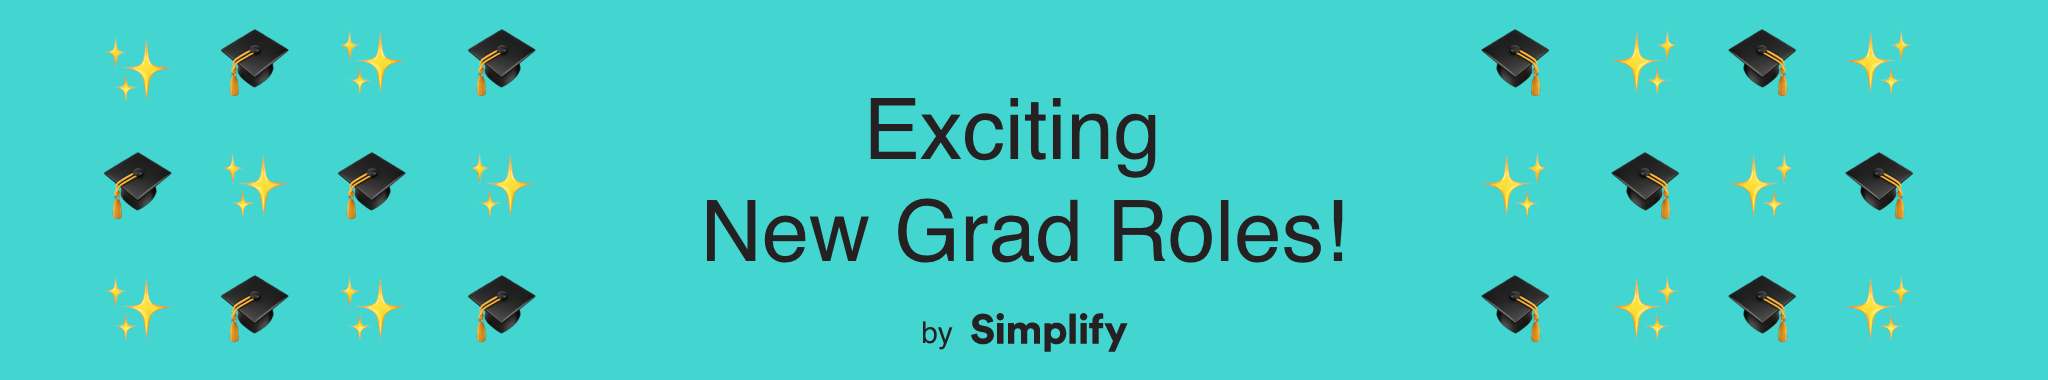 text that says “Exciting New Grad Roles by Simplify” surrounded by star and graduation cap emojis